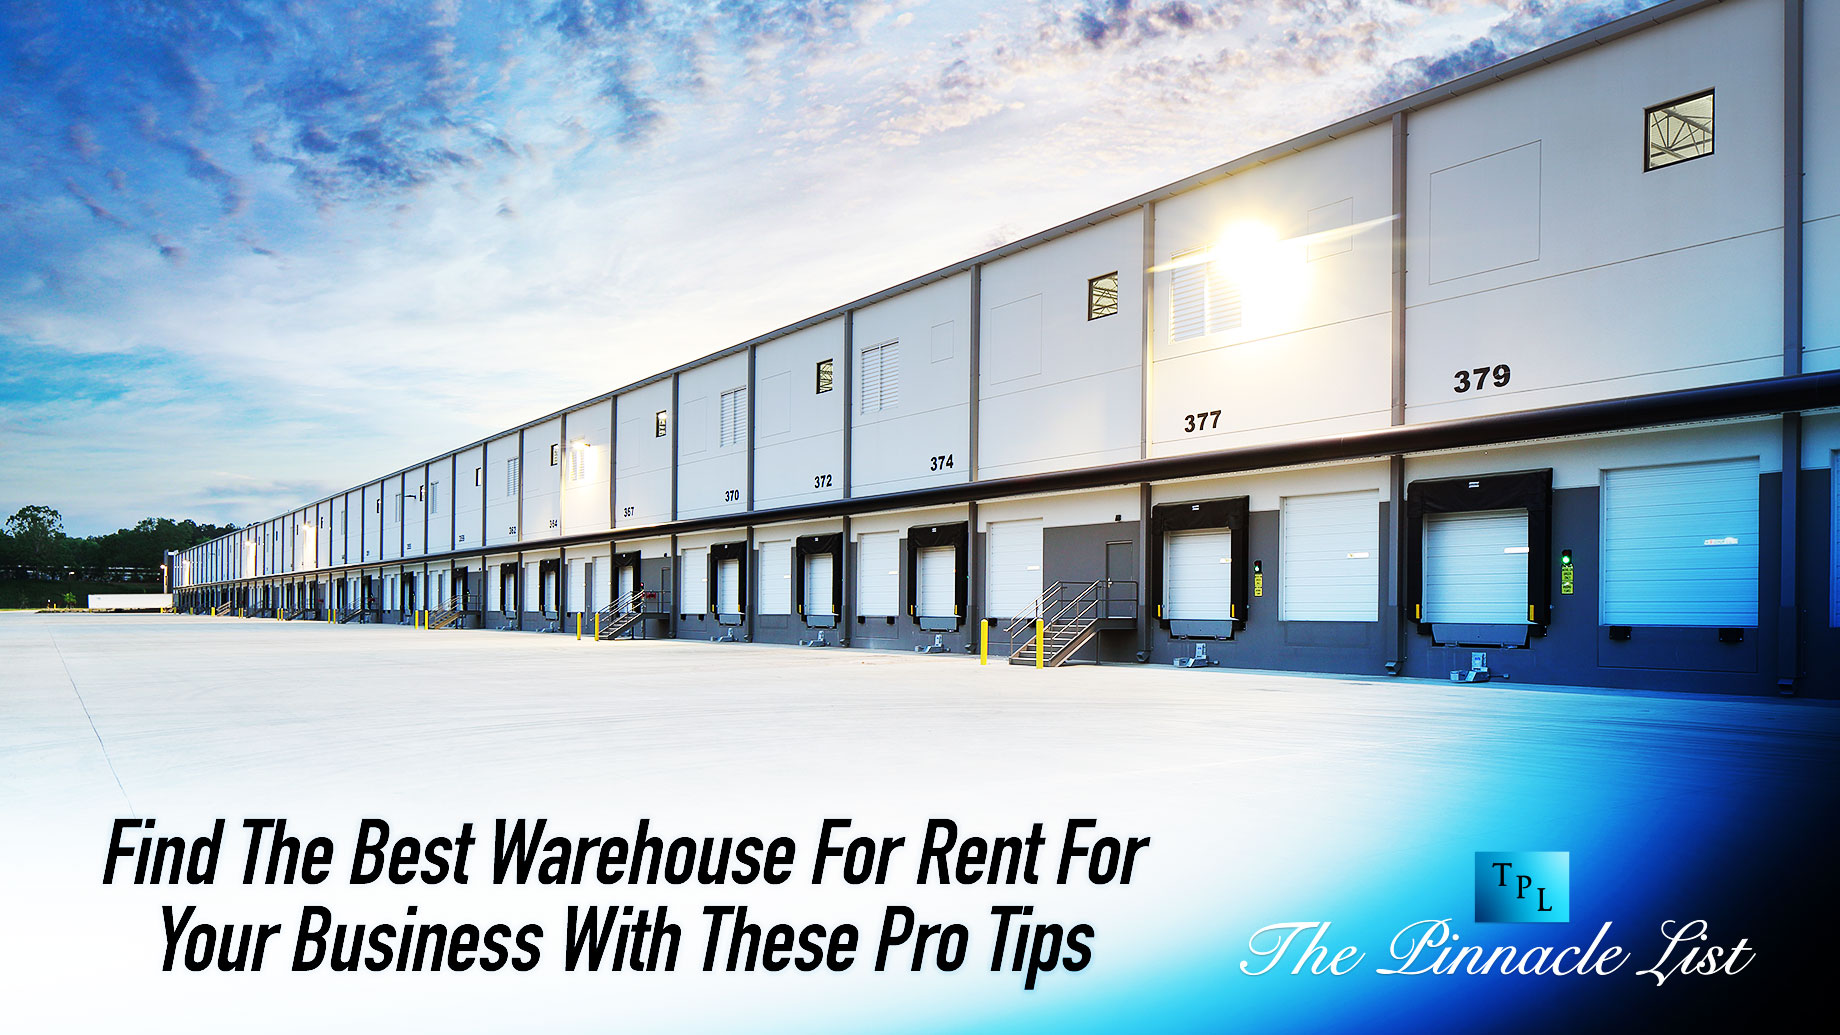 Find The Best Warehouse For Rent For Your Business With These Pro Tips